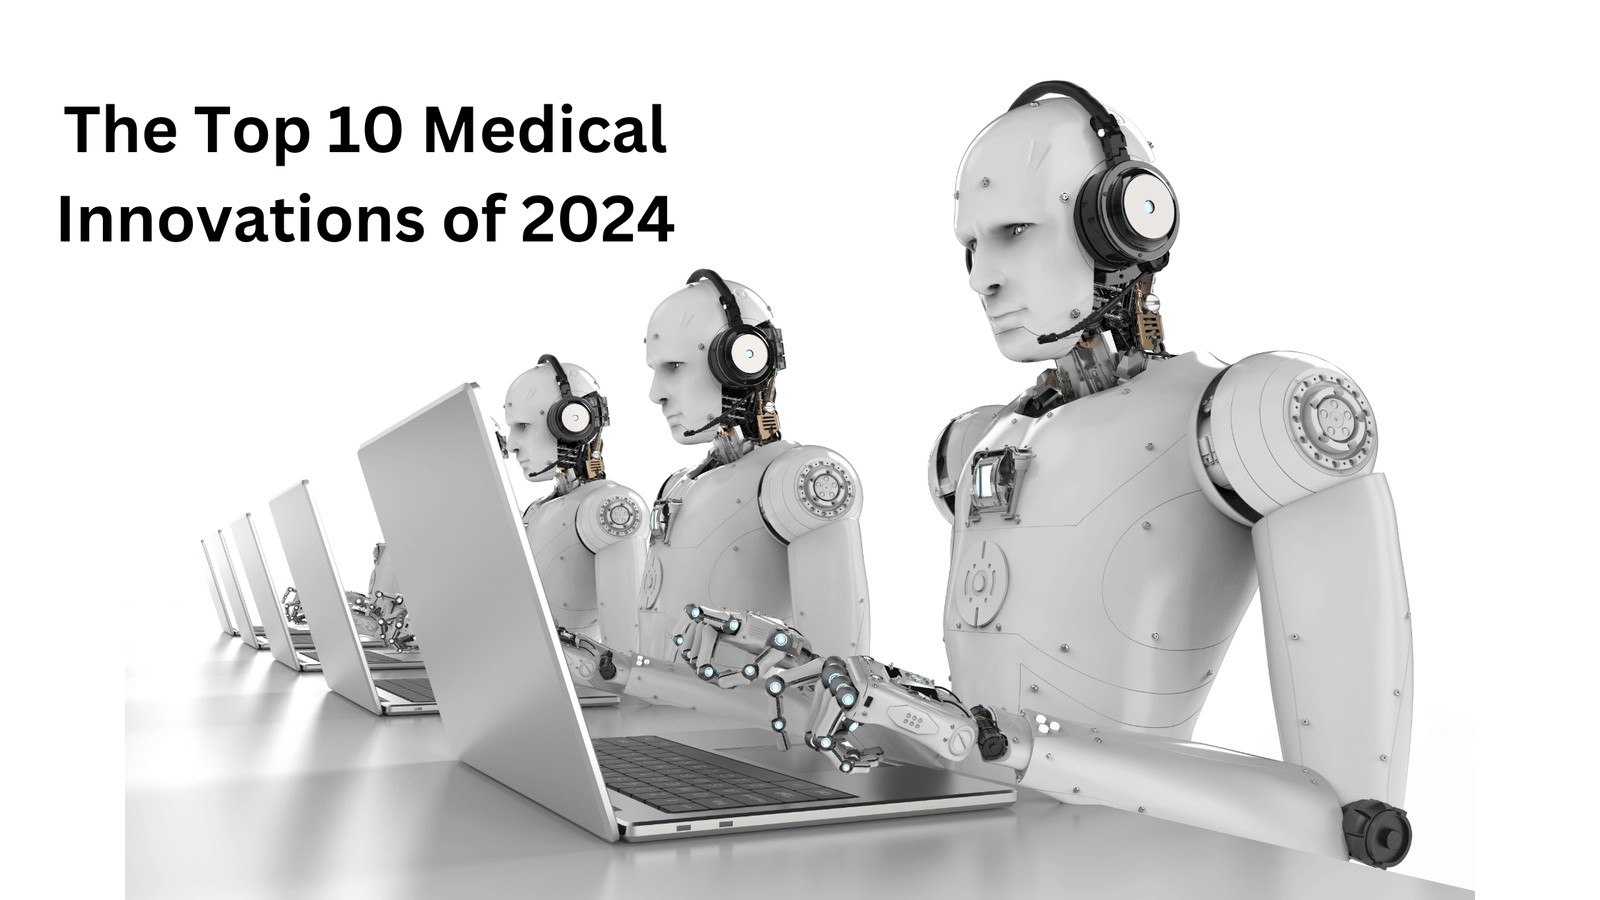 The Top 10 Medical Innovations of 2024